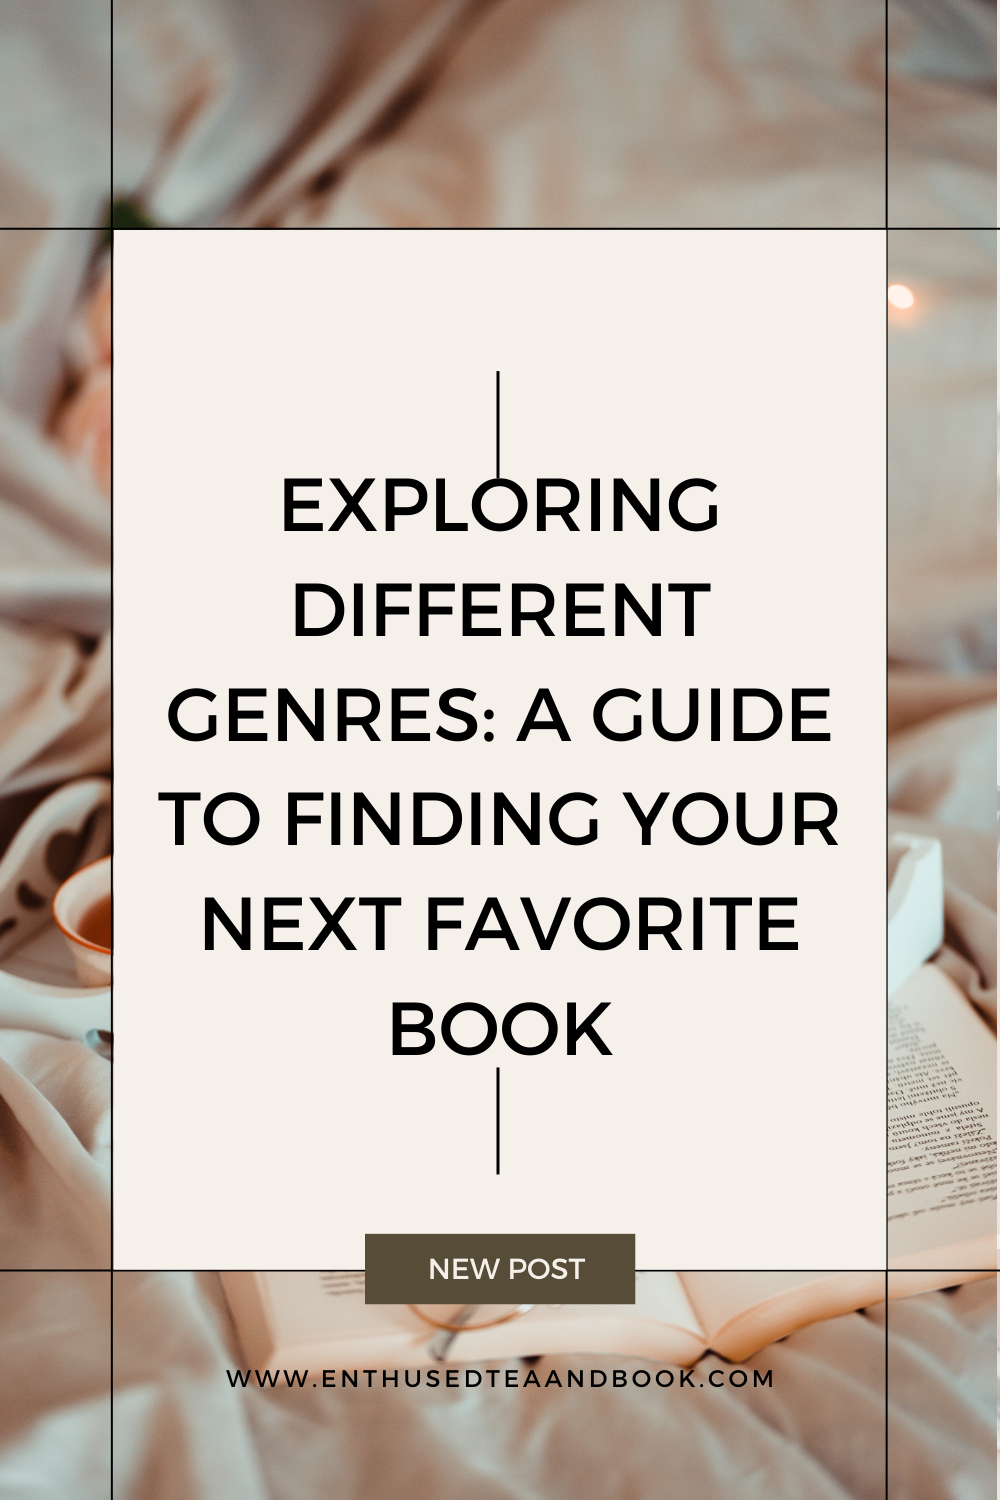 Exploring Different Genres: A Guide to Finding Your Next Favorite Book